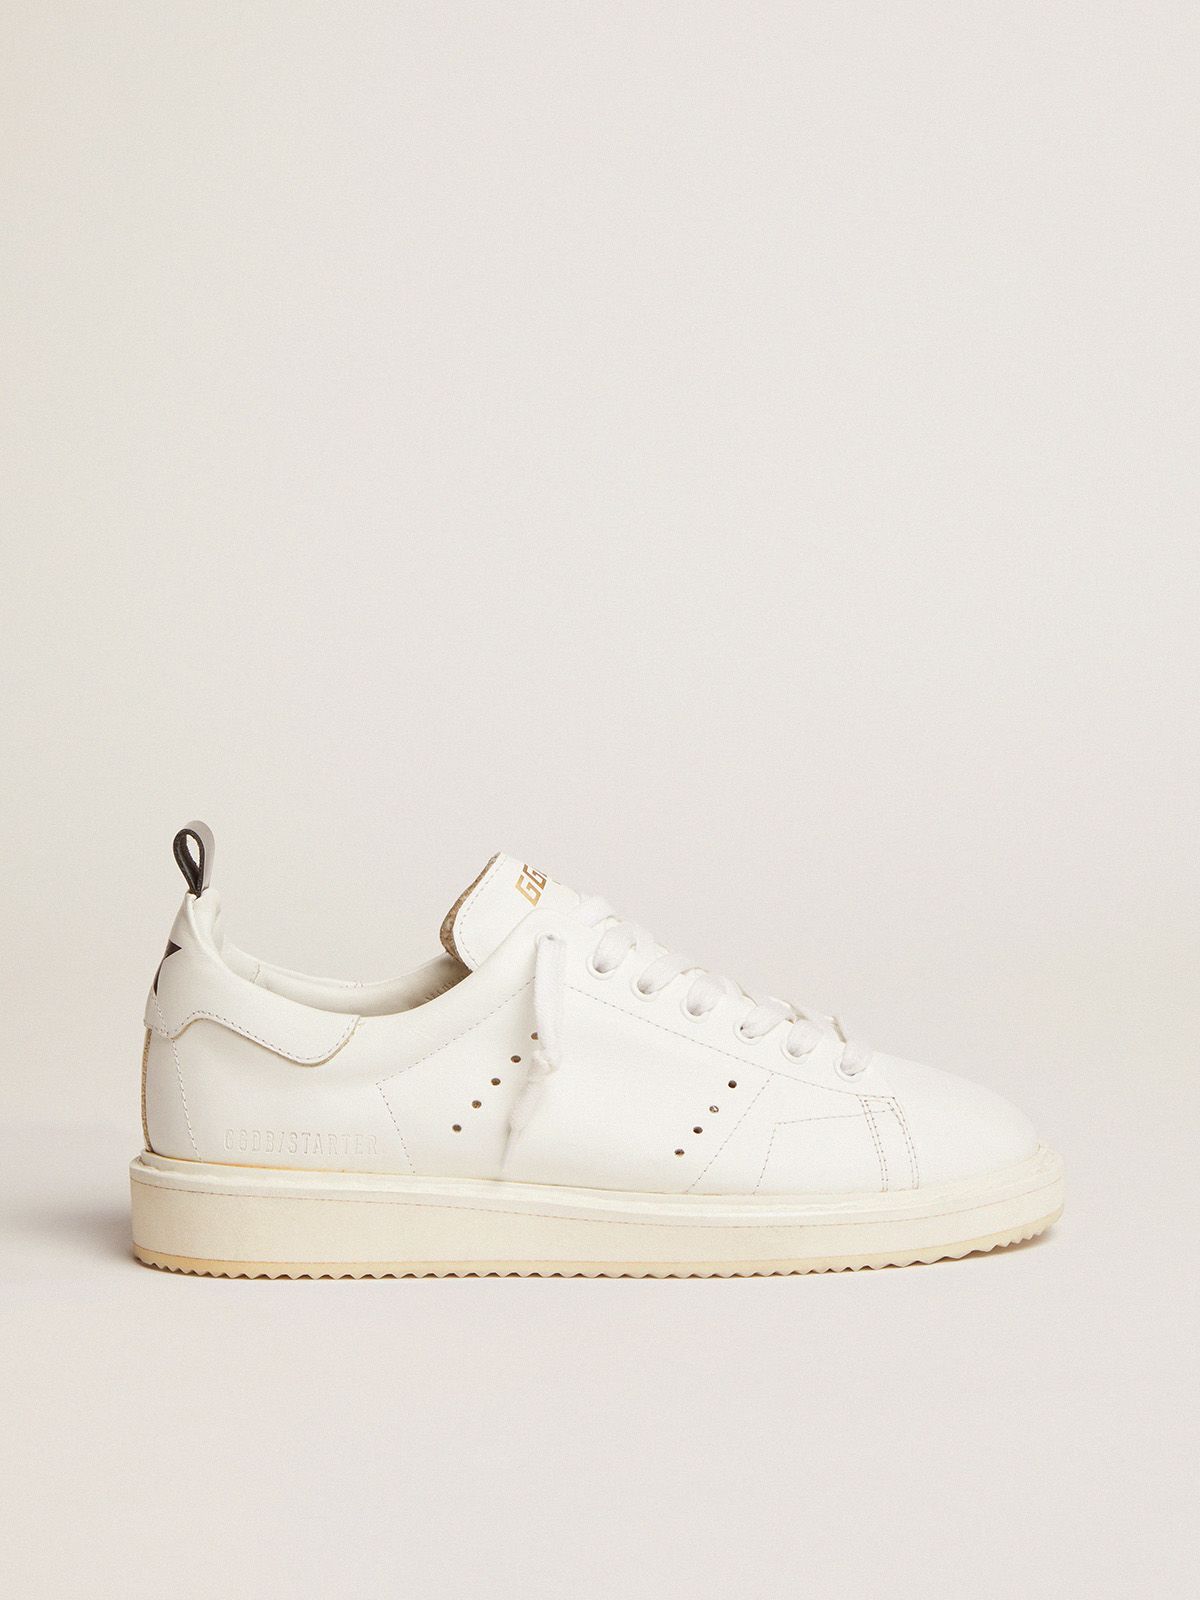 Ggdb Starter sneakers in total white leather